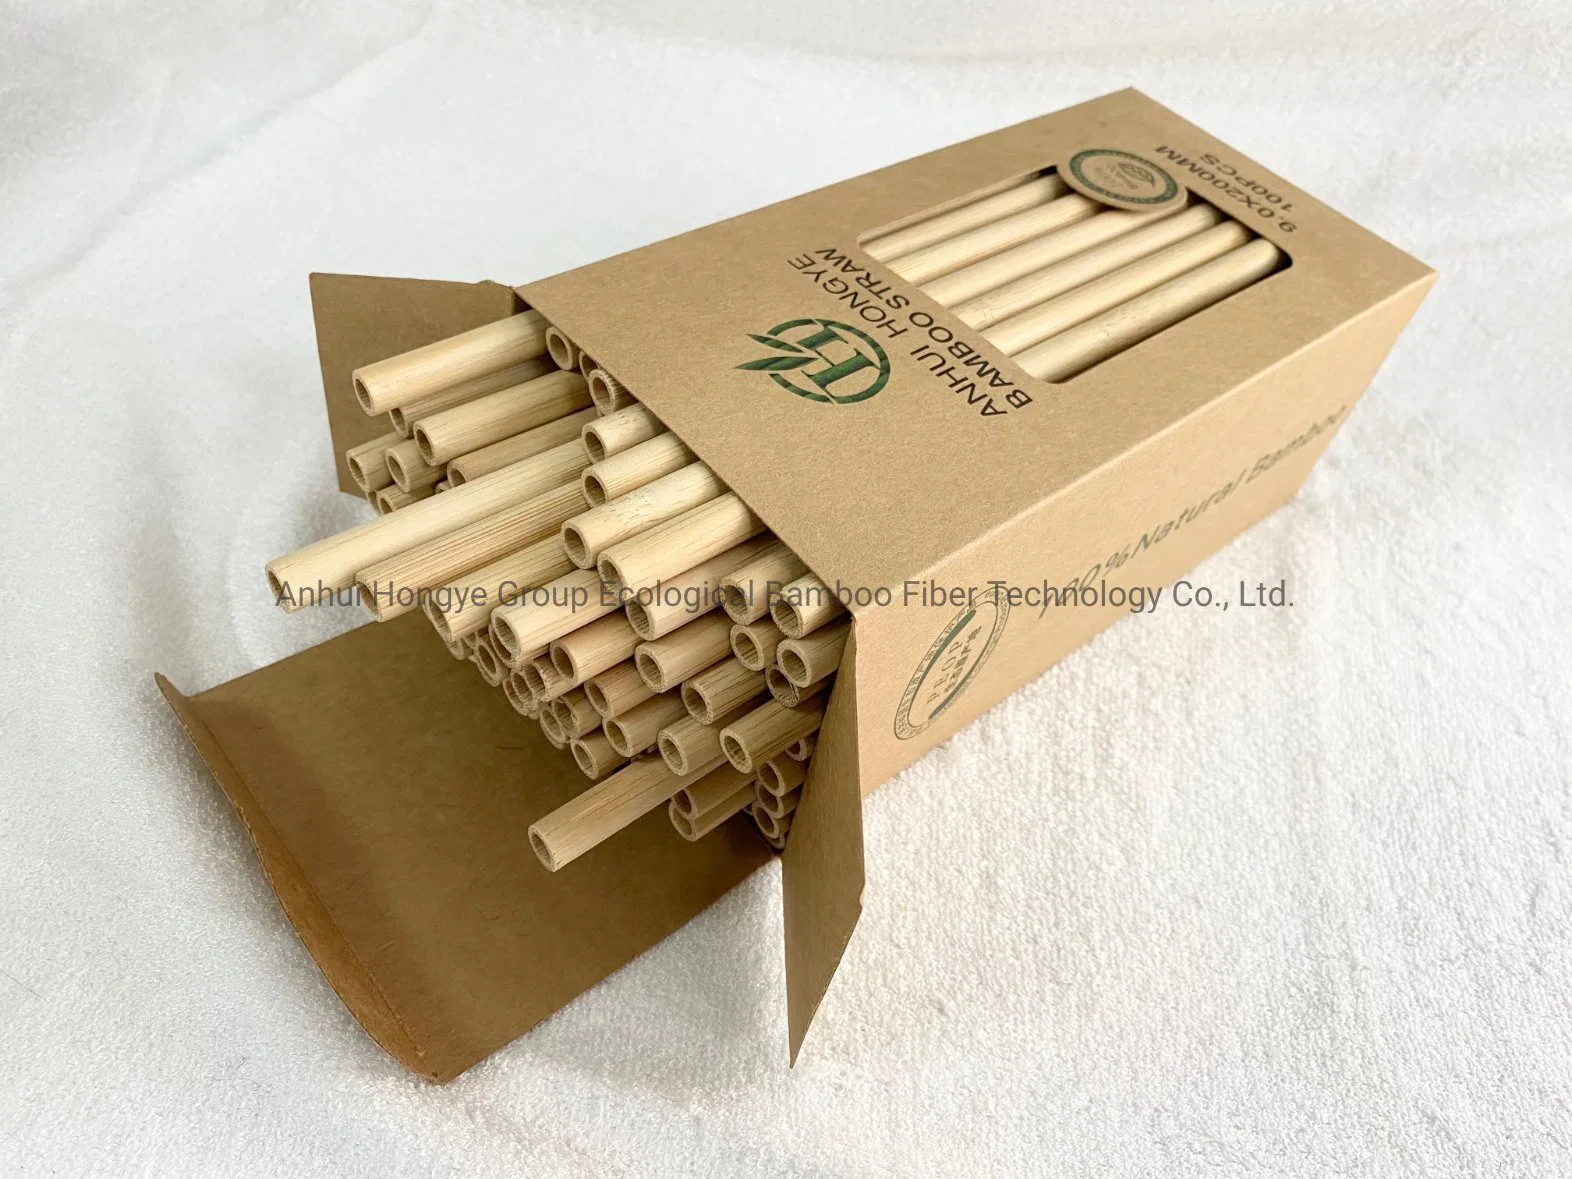 Disposable Carbonization Bamboo Straw Biodegradable 9.0*200 mm